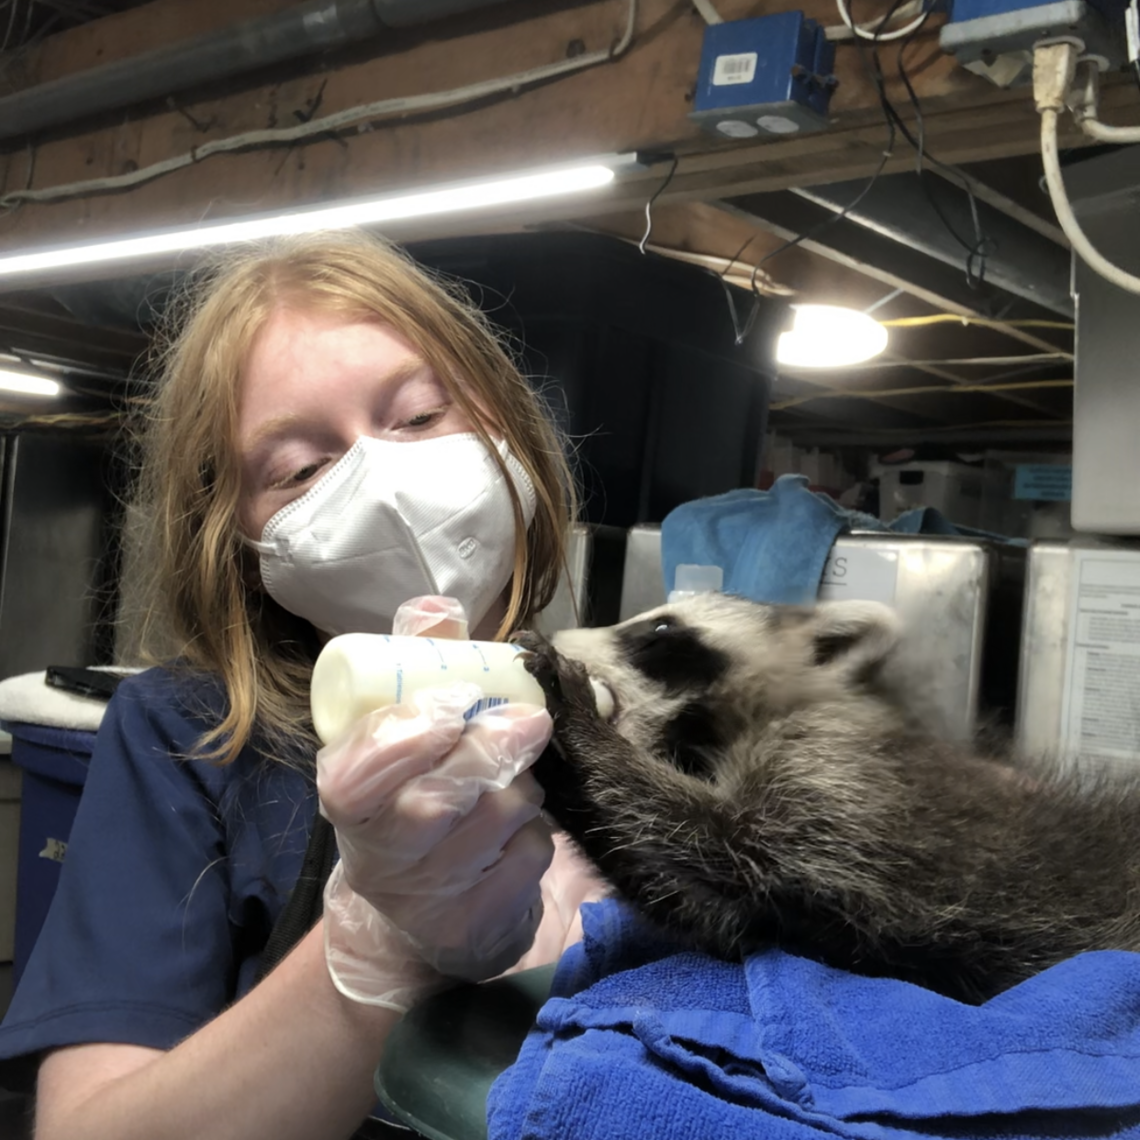 "I've fallen in love with every single creature I've held â€” especially the baby raccoons," Adam said. "It makes me so happy to see them thriving and returning to their natural habitats.